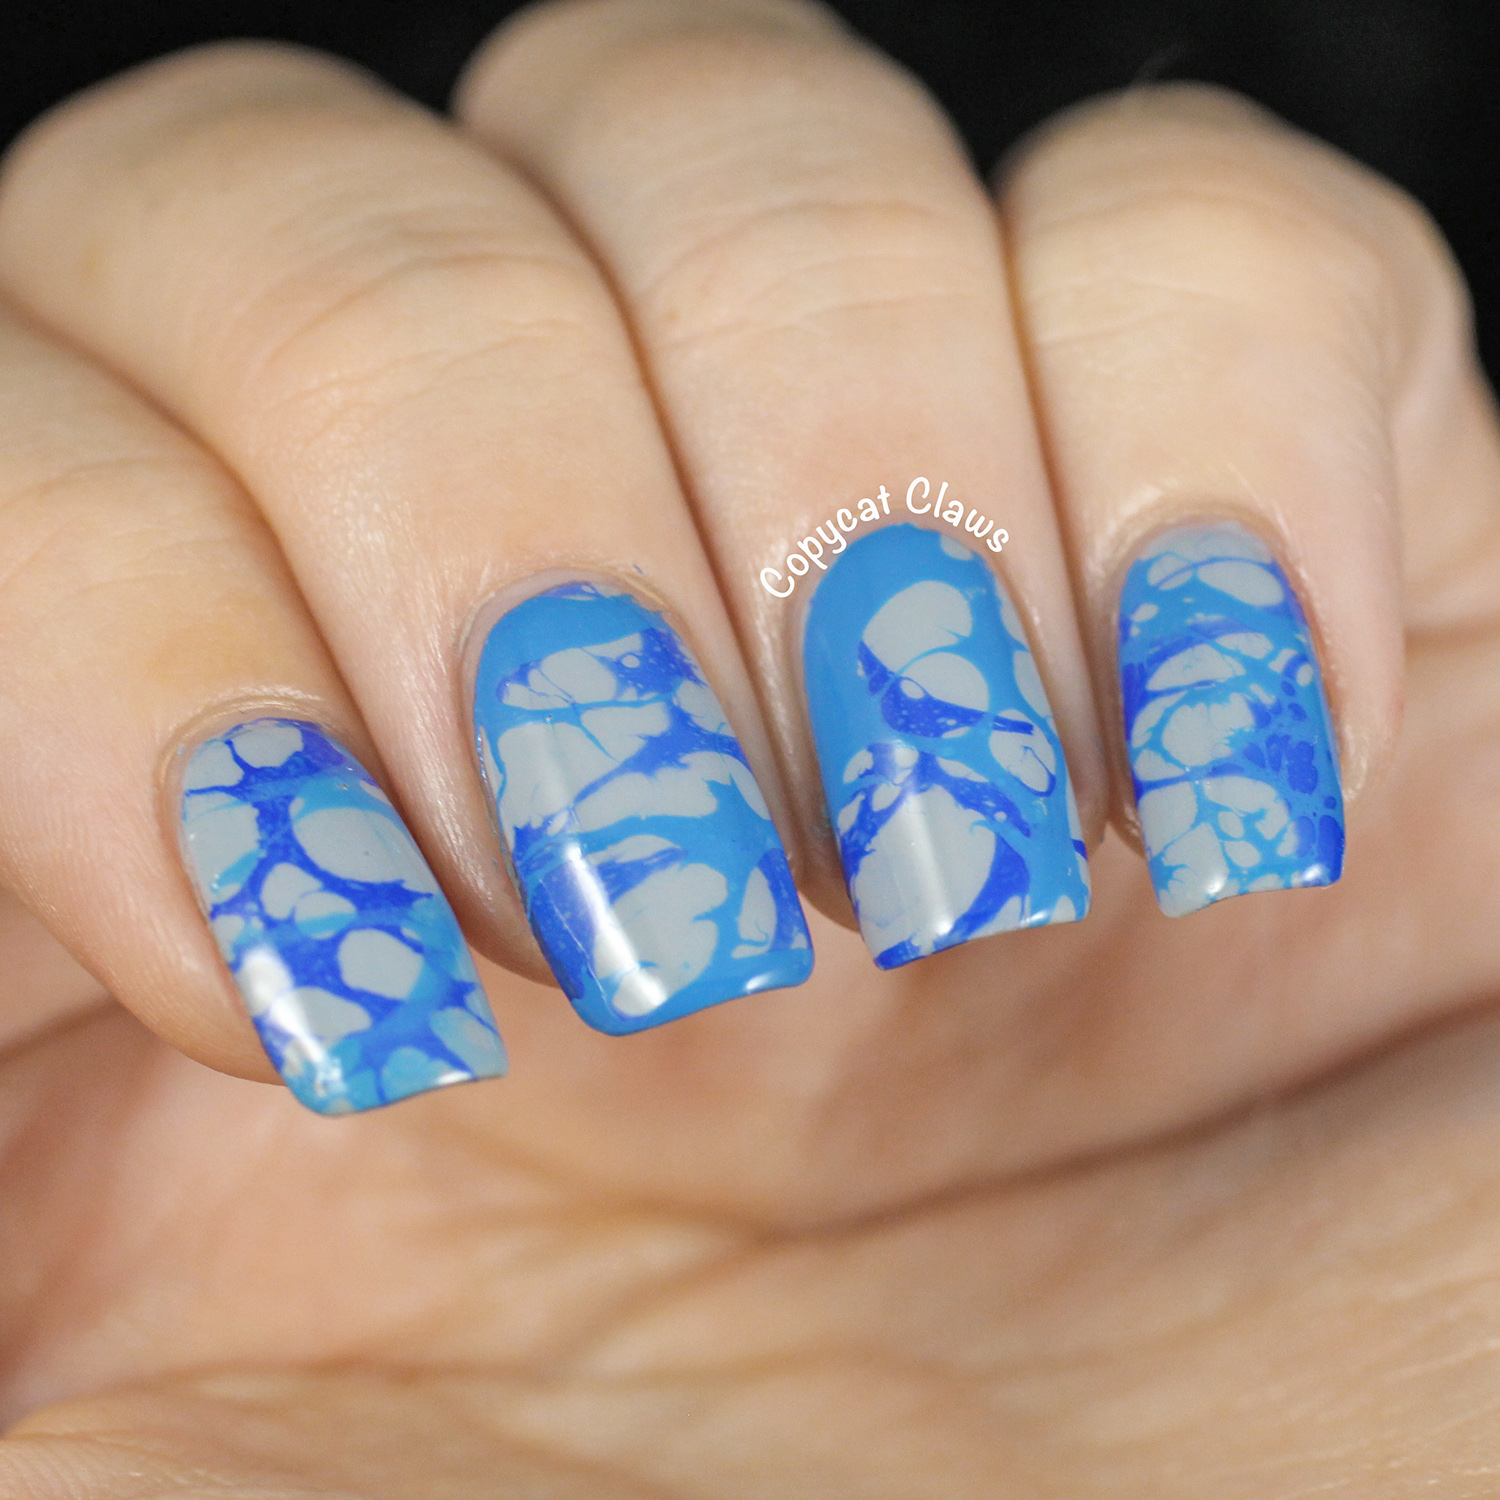 Copycat Claws: Triple Water Spotted Nails